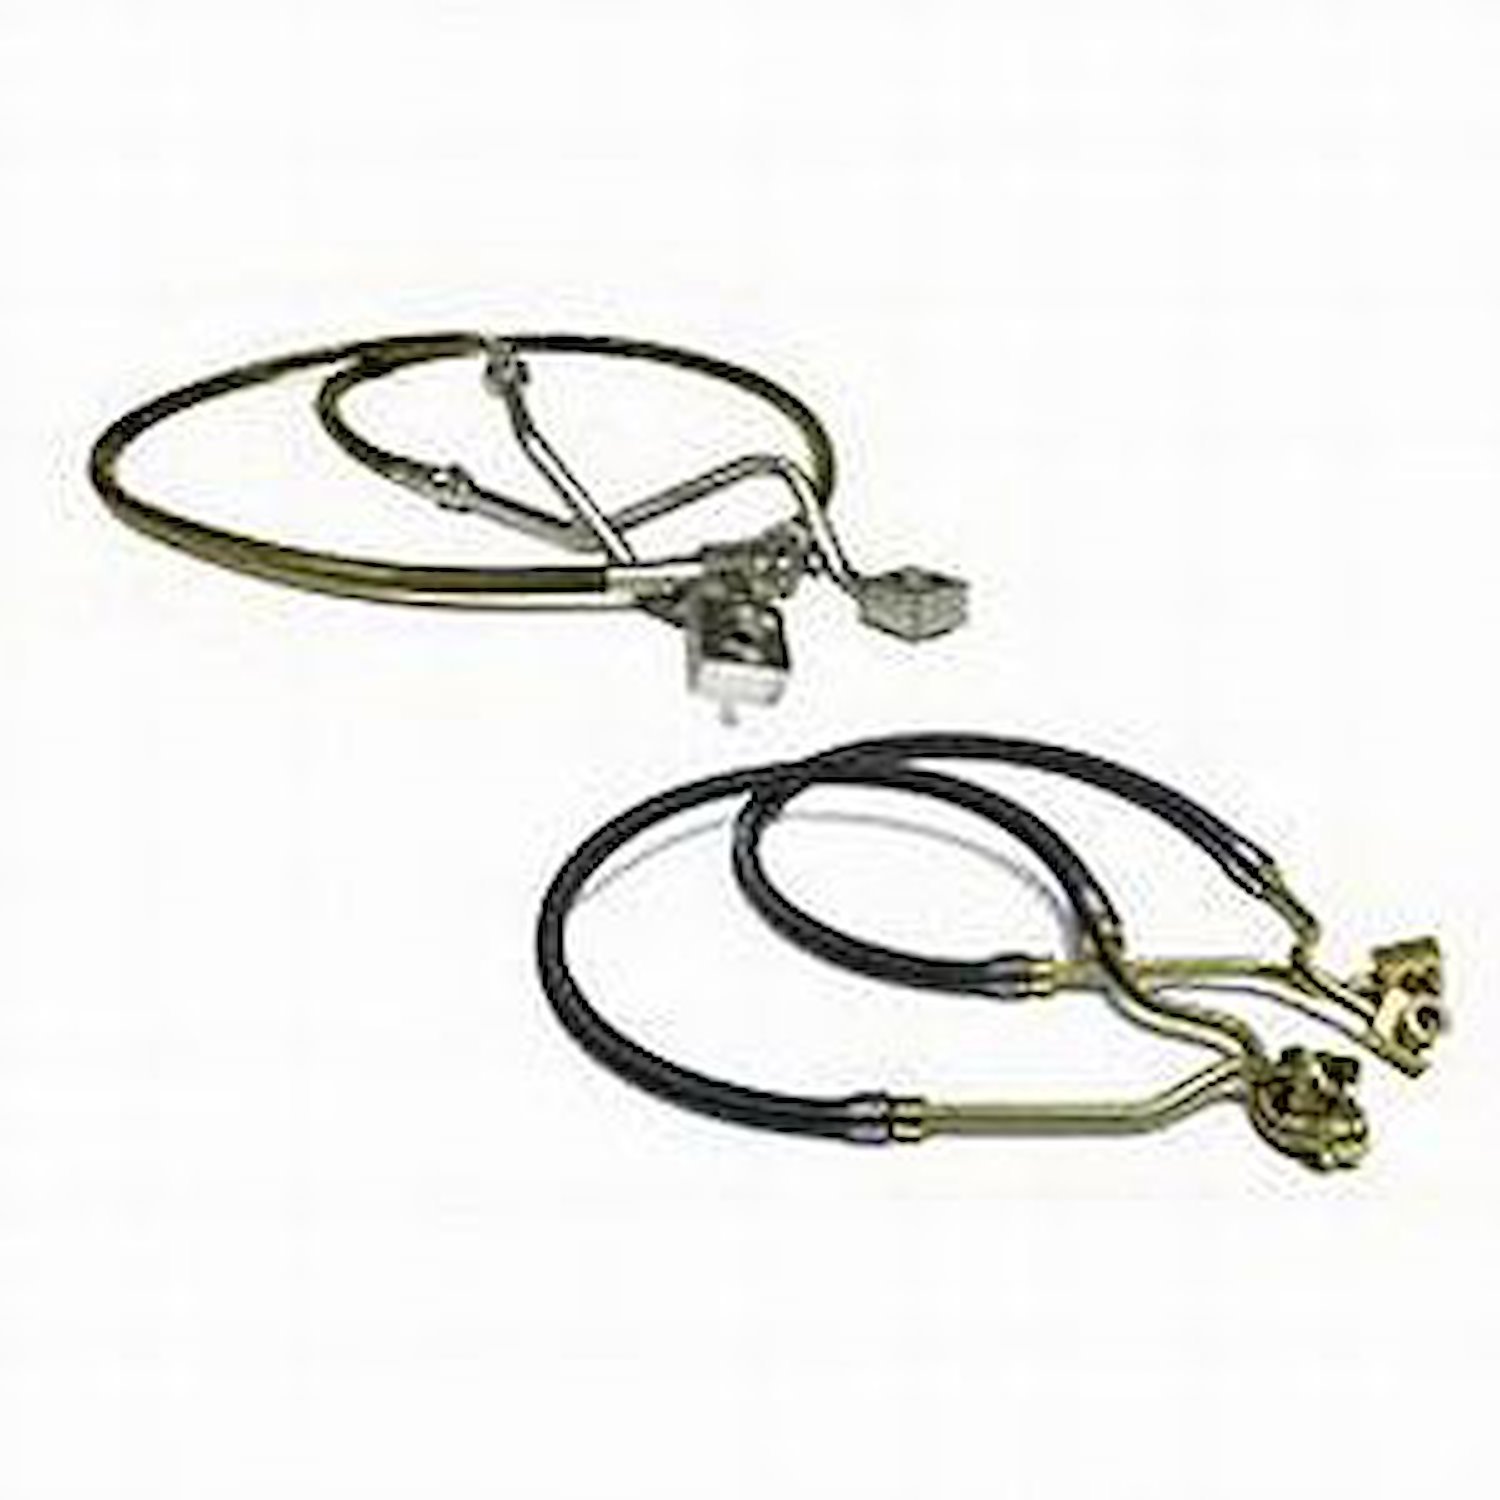 Bullet Proof Kevlar  Brake Hose Front Reinforced Braided Stainless Steel Length Over Stock 3 in. Vehicles w/4 in. Lift